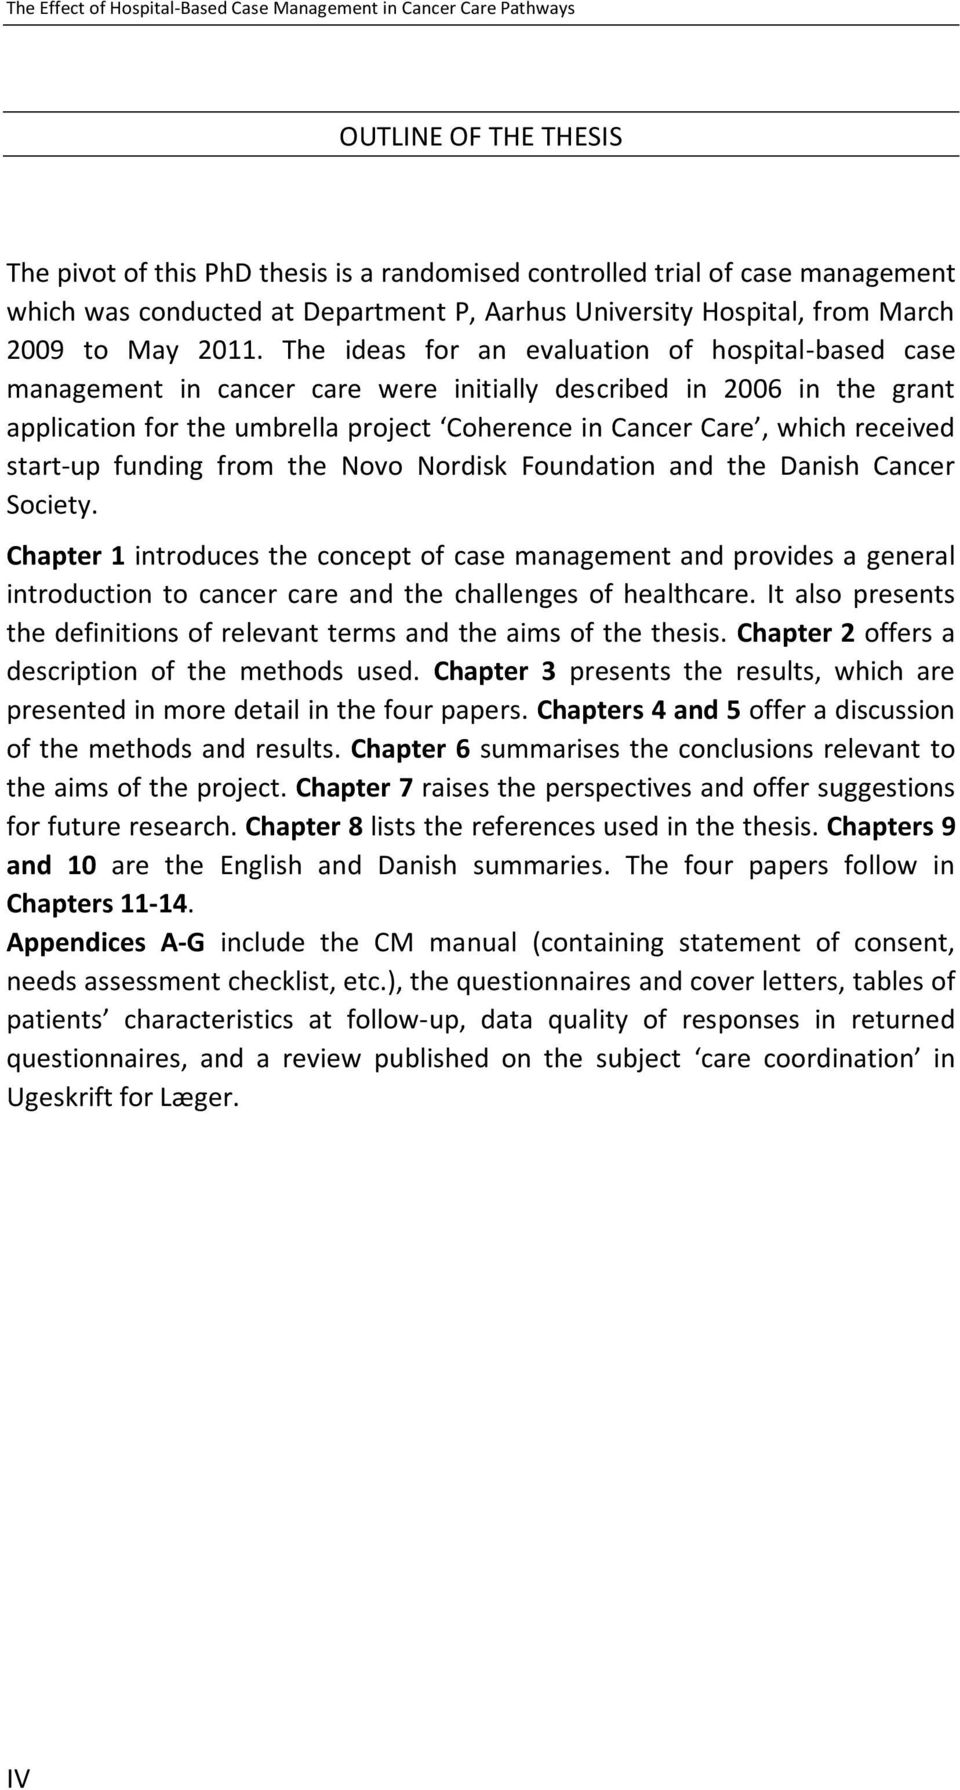 The ideas for an evaluation of hospital-based case management in cancer care were initially described in 2006 in the grant application for the umbrella project Coherence in Cancer Care, which